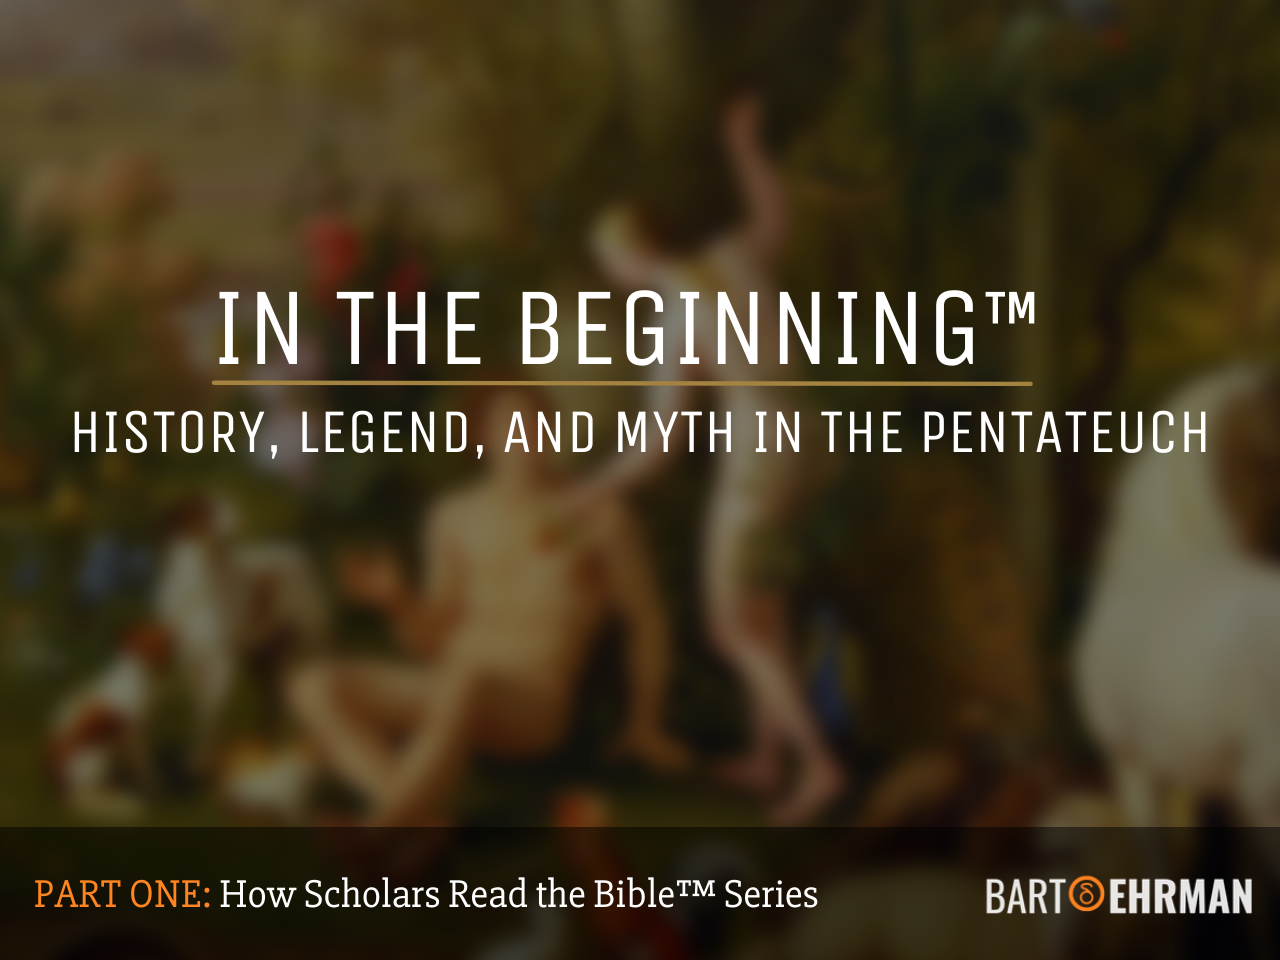 In the Beginning - History, Legend, and Myth in Genesis